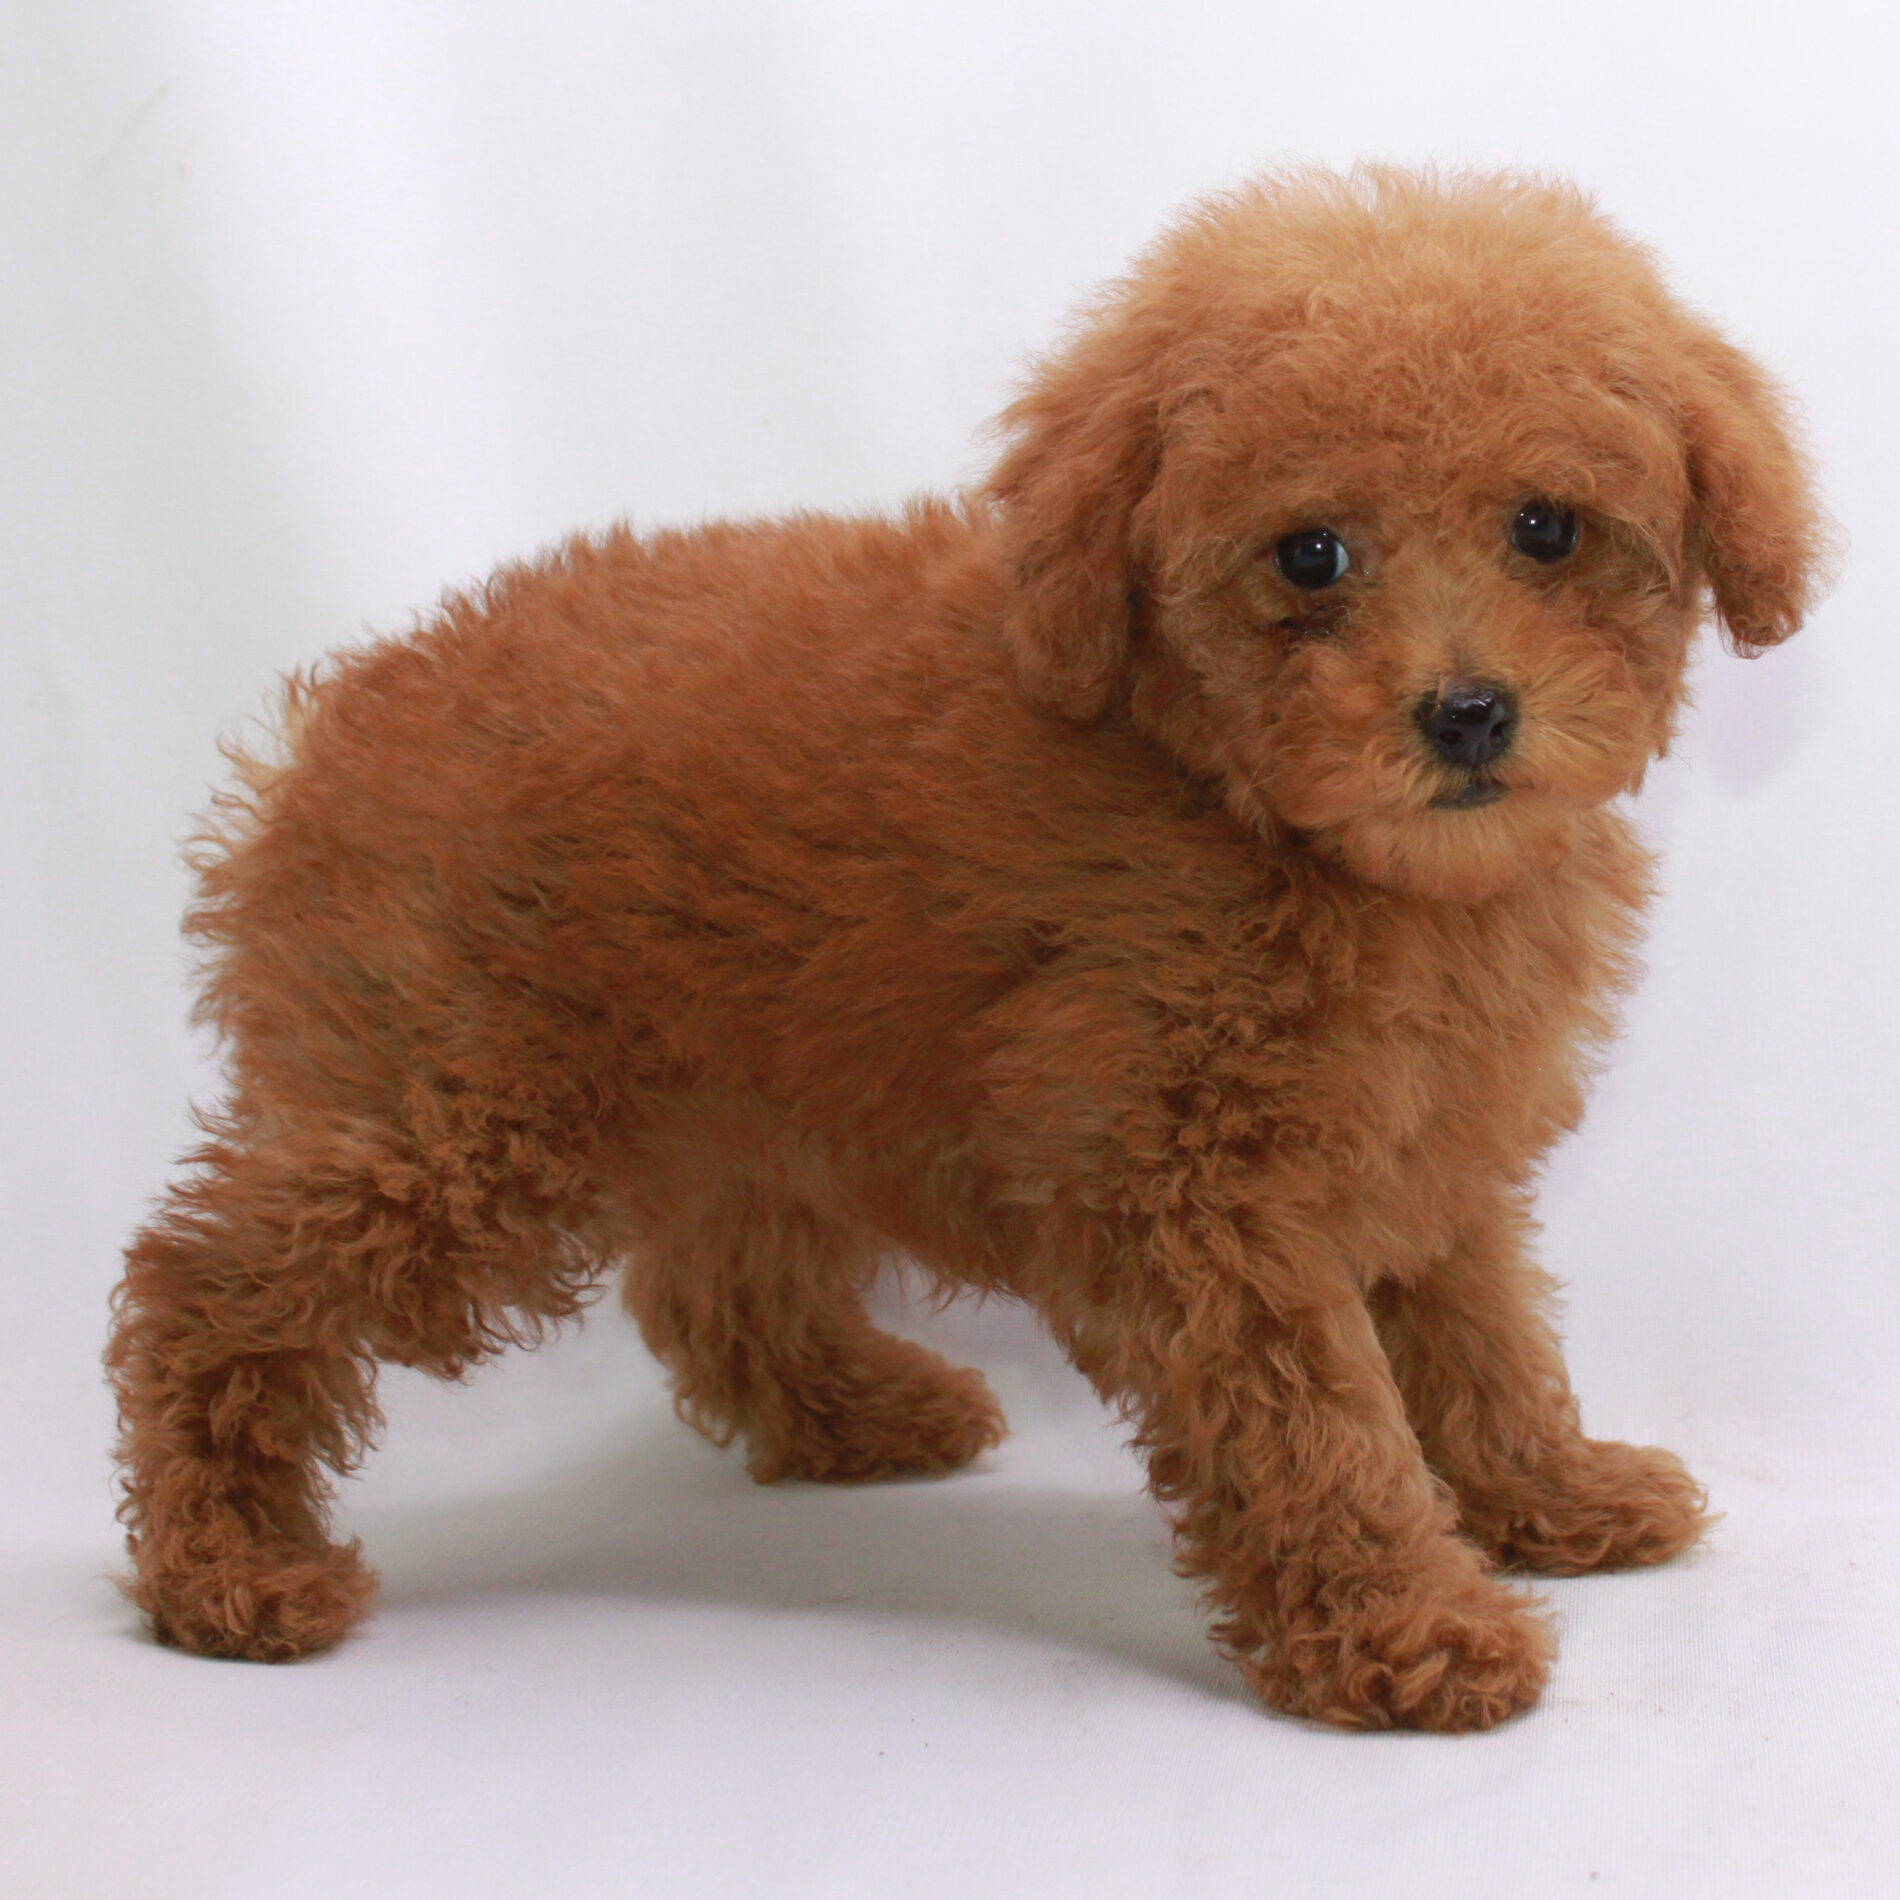 how much is a red miniature poodle?